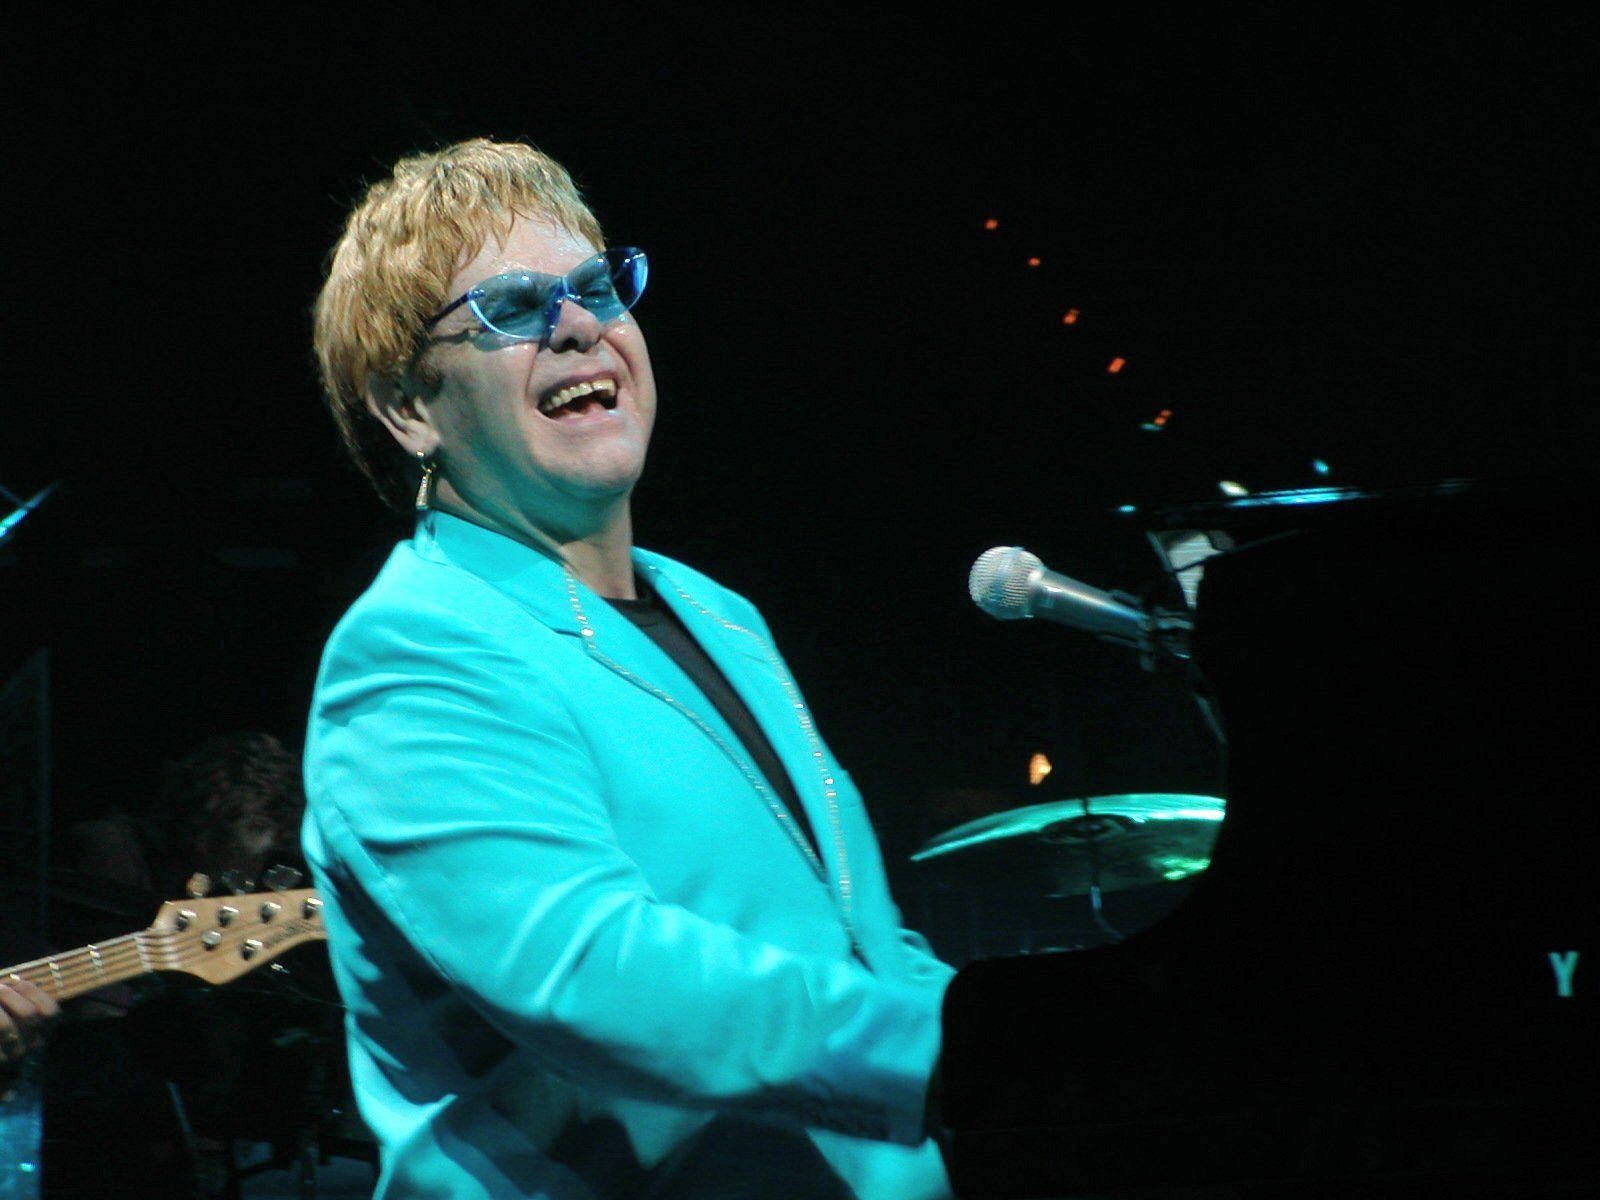 Rocketman Laughing On Live Performance Background